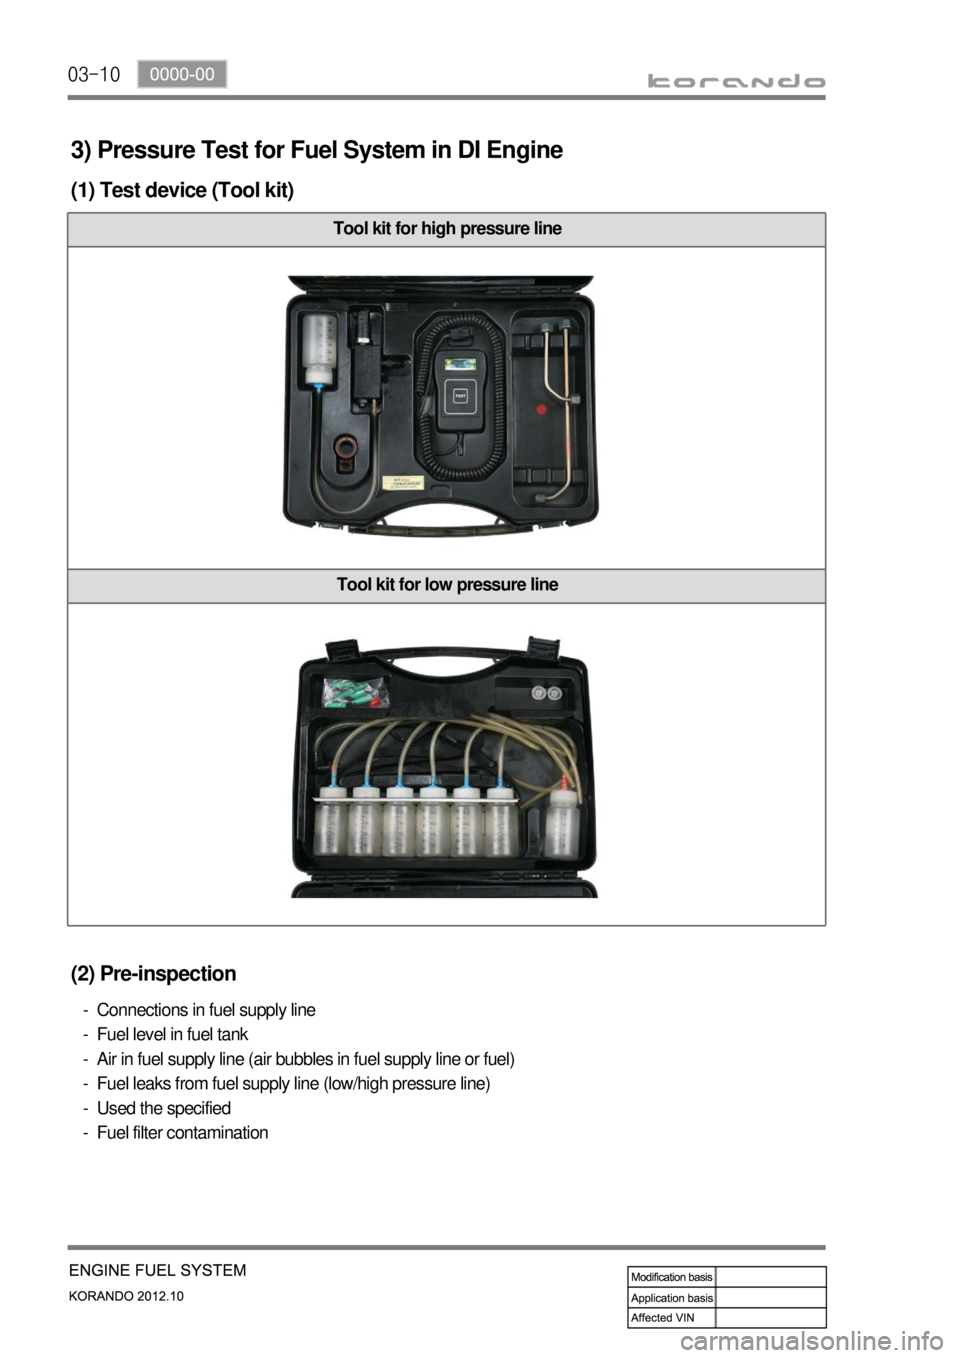 SSANGYONG KORANDO 2012  Service Manual 03-10
3) Pressure Test for Fuel System in DI Engine
(1) Test device (Tool kit)
Tool kit for high pressure line
Tool kit for low pressure line
(2) Pre-inspection
Connections in fuel supply line
Fuel le